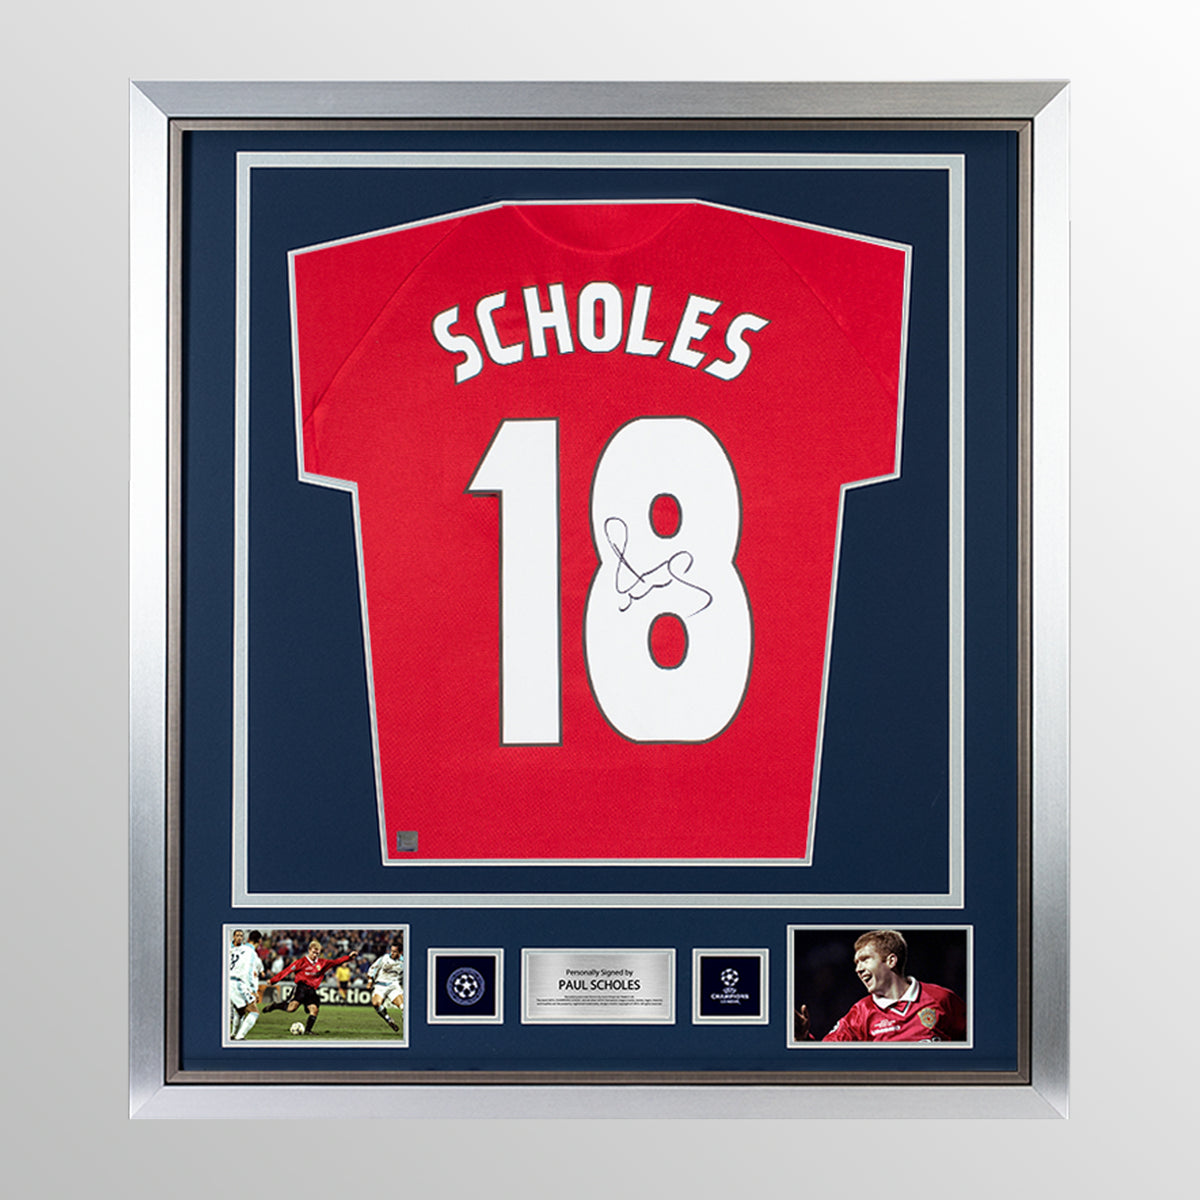 Paul Scholes Official UEFA Champions League Back Signed and Framed 1999 Manchester United Home Shirt: UCL Edition UEFA Club Competitions Online Store